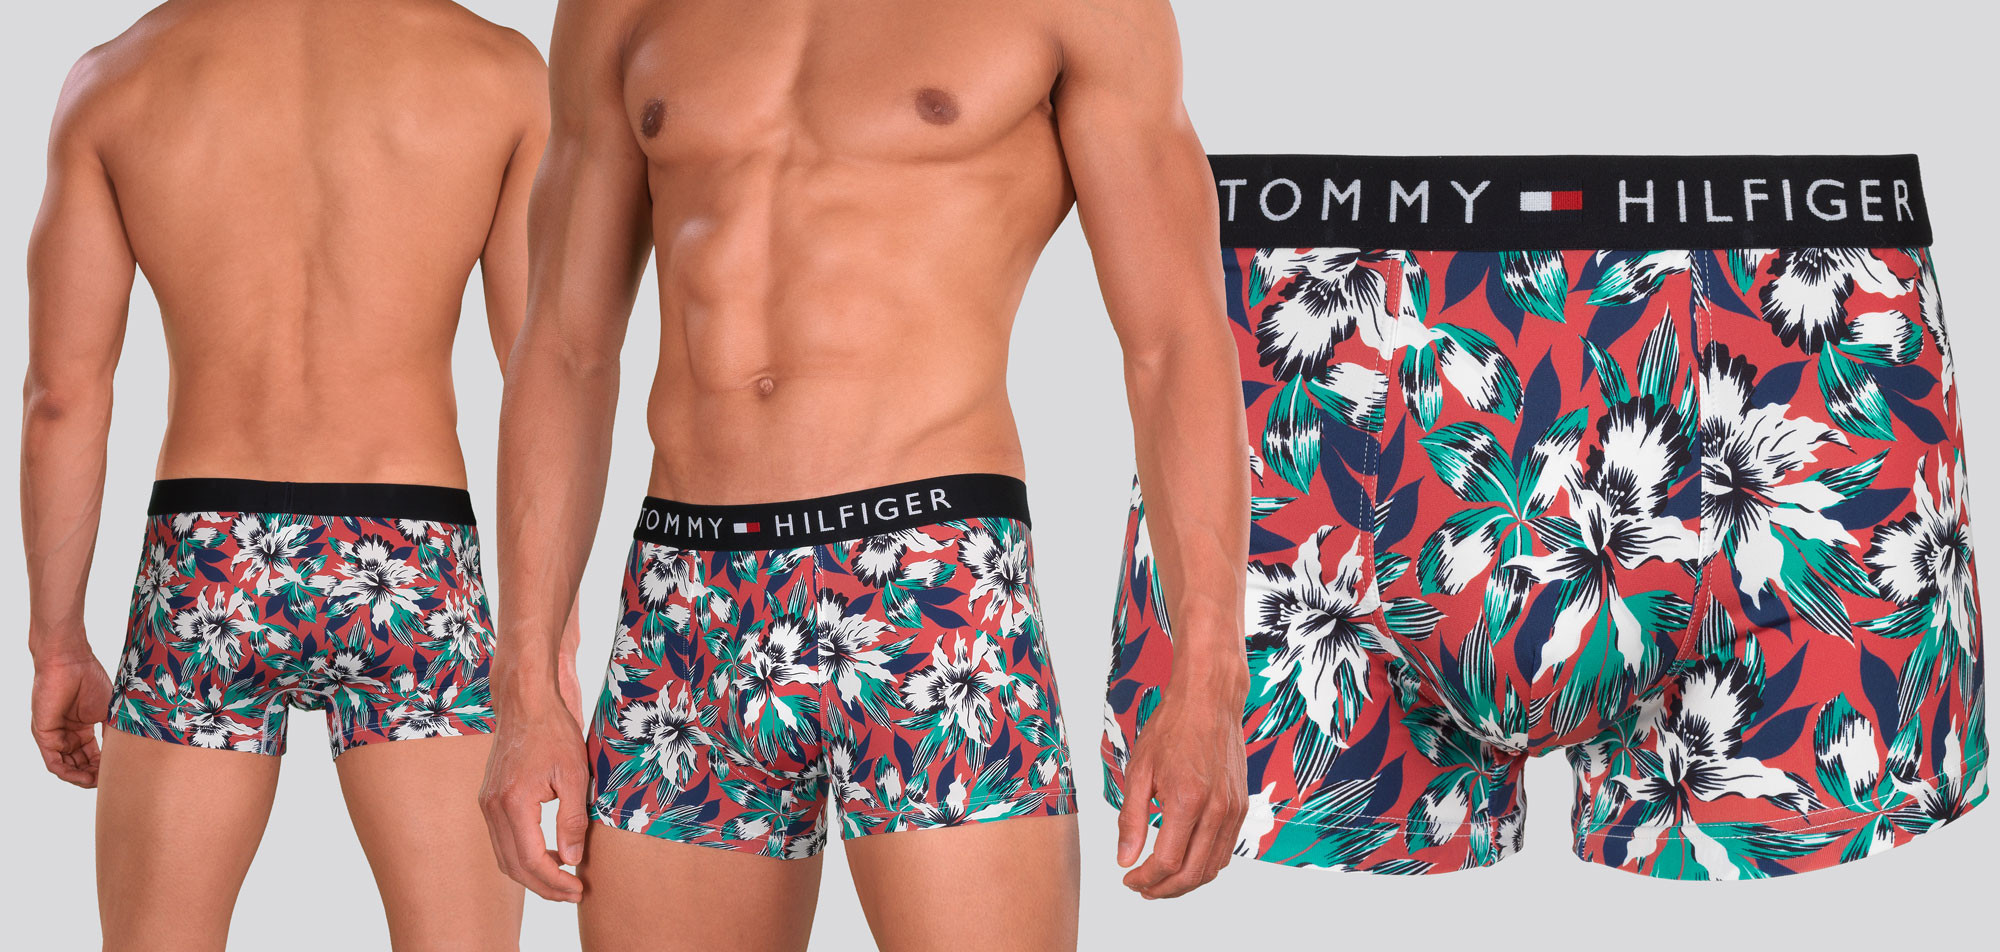 Tommy Hilfiger Microfiber Trunk 821 Tropical Floral Frosted Print, color Nee